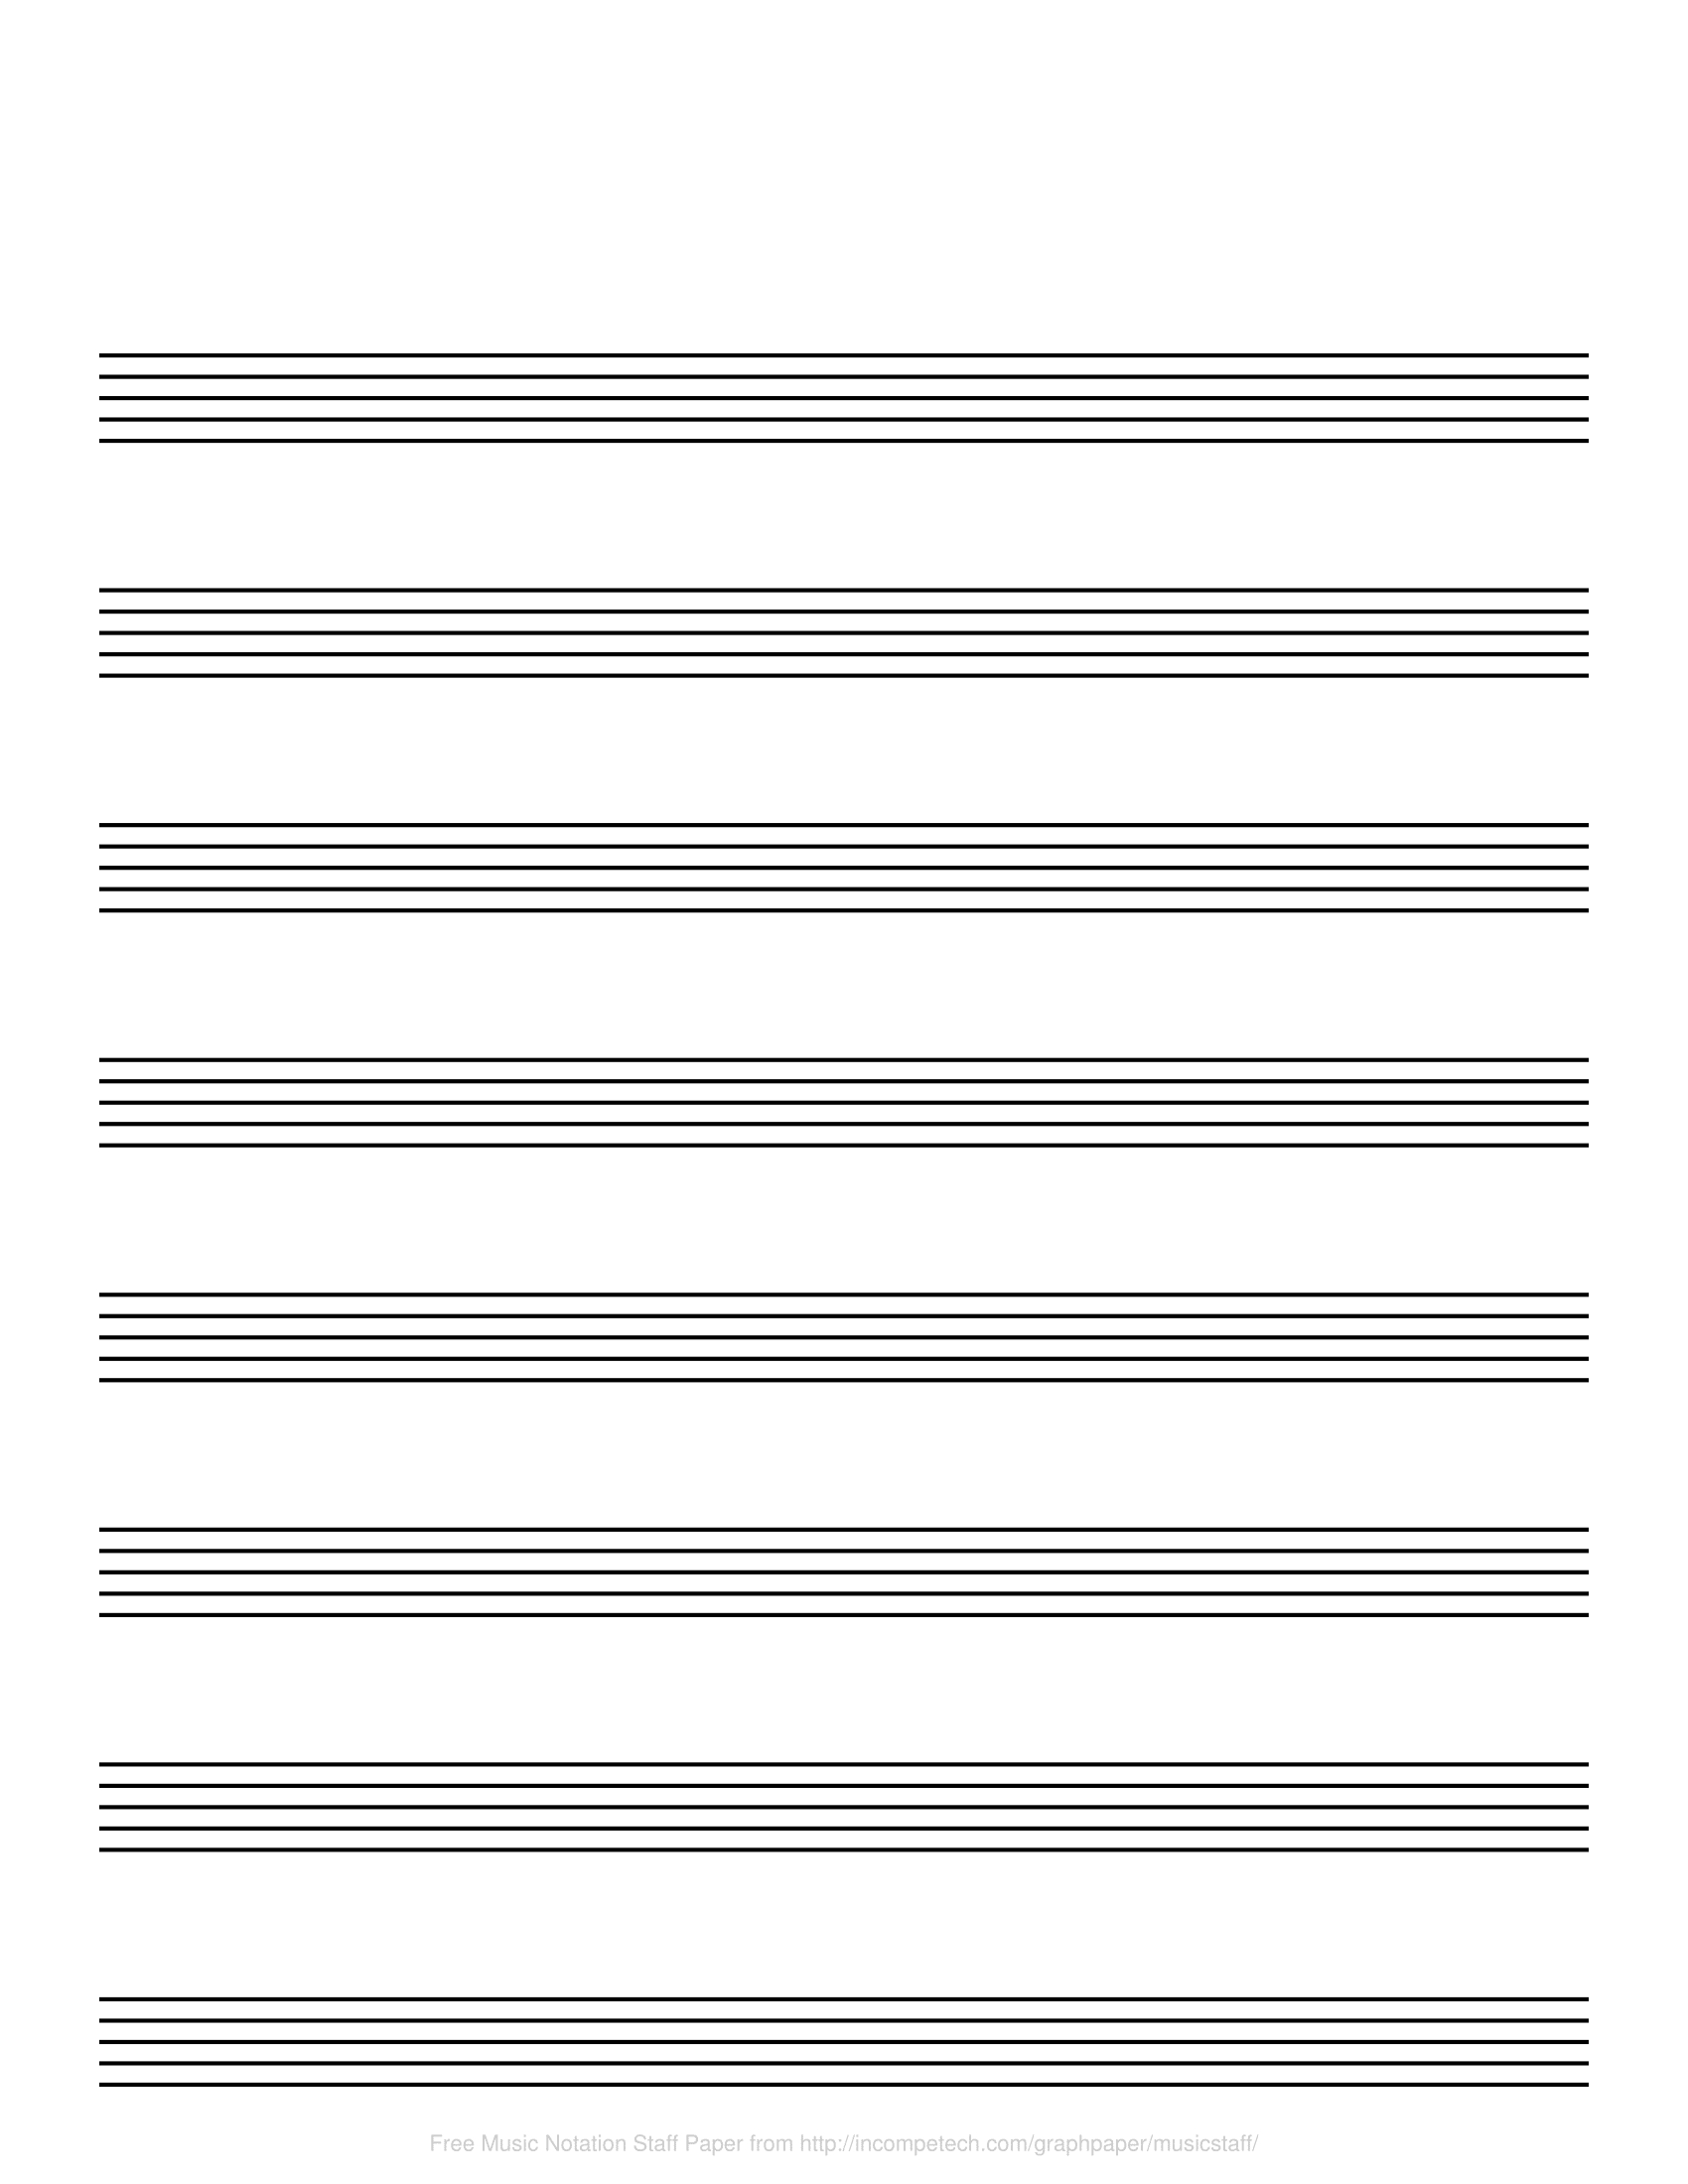 Free Music Staff Paper Printable Get What You Need For Free